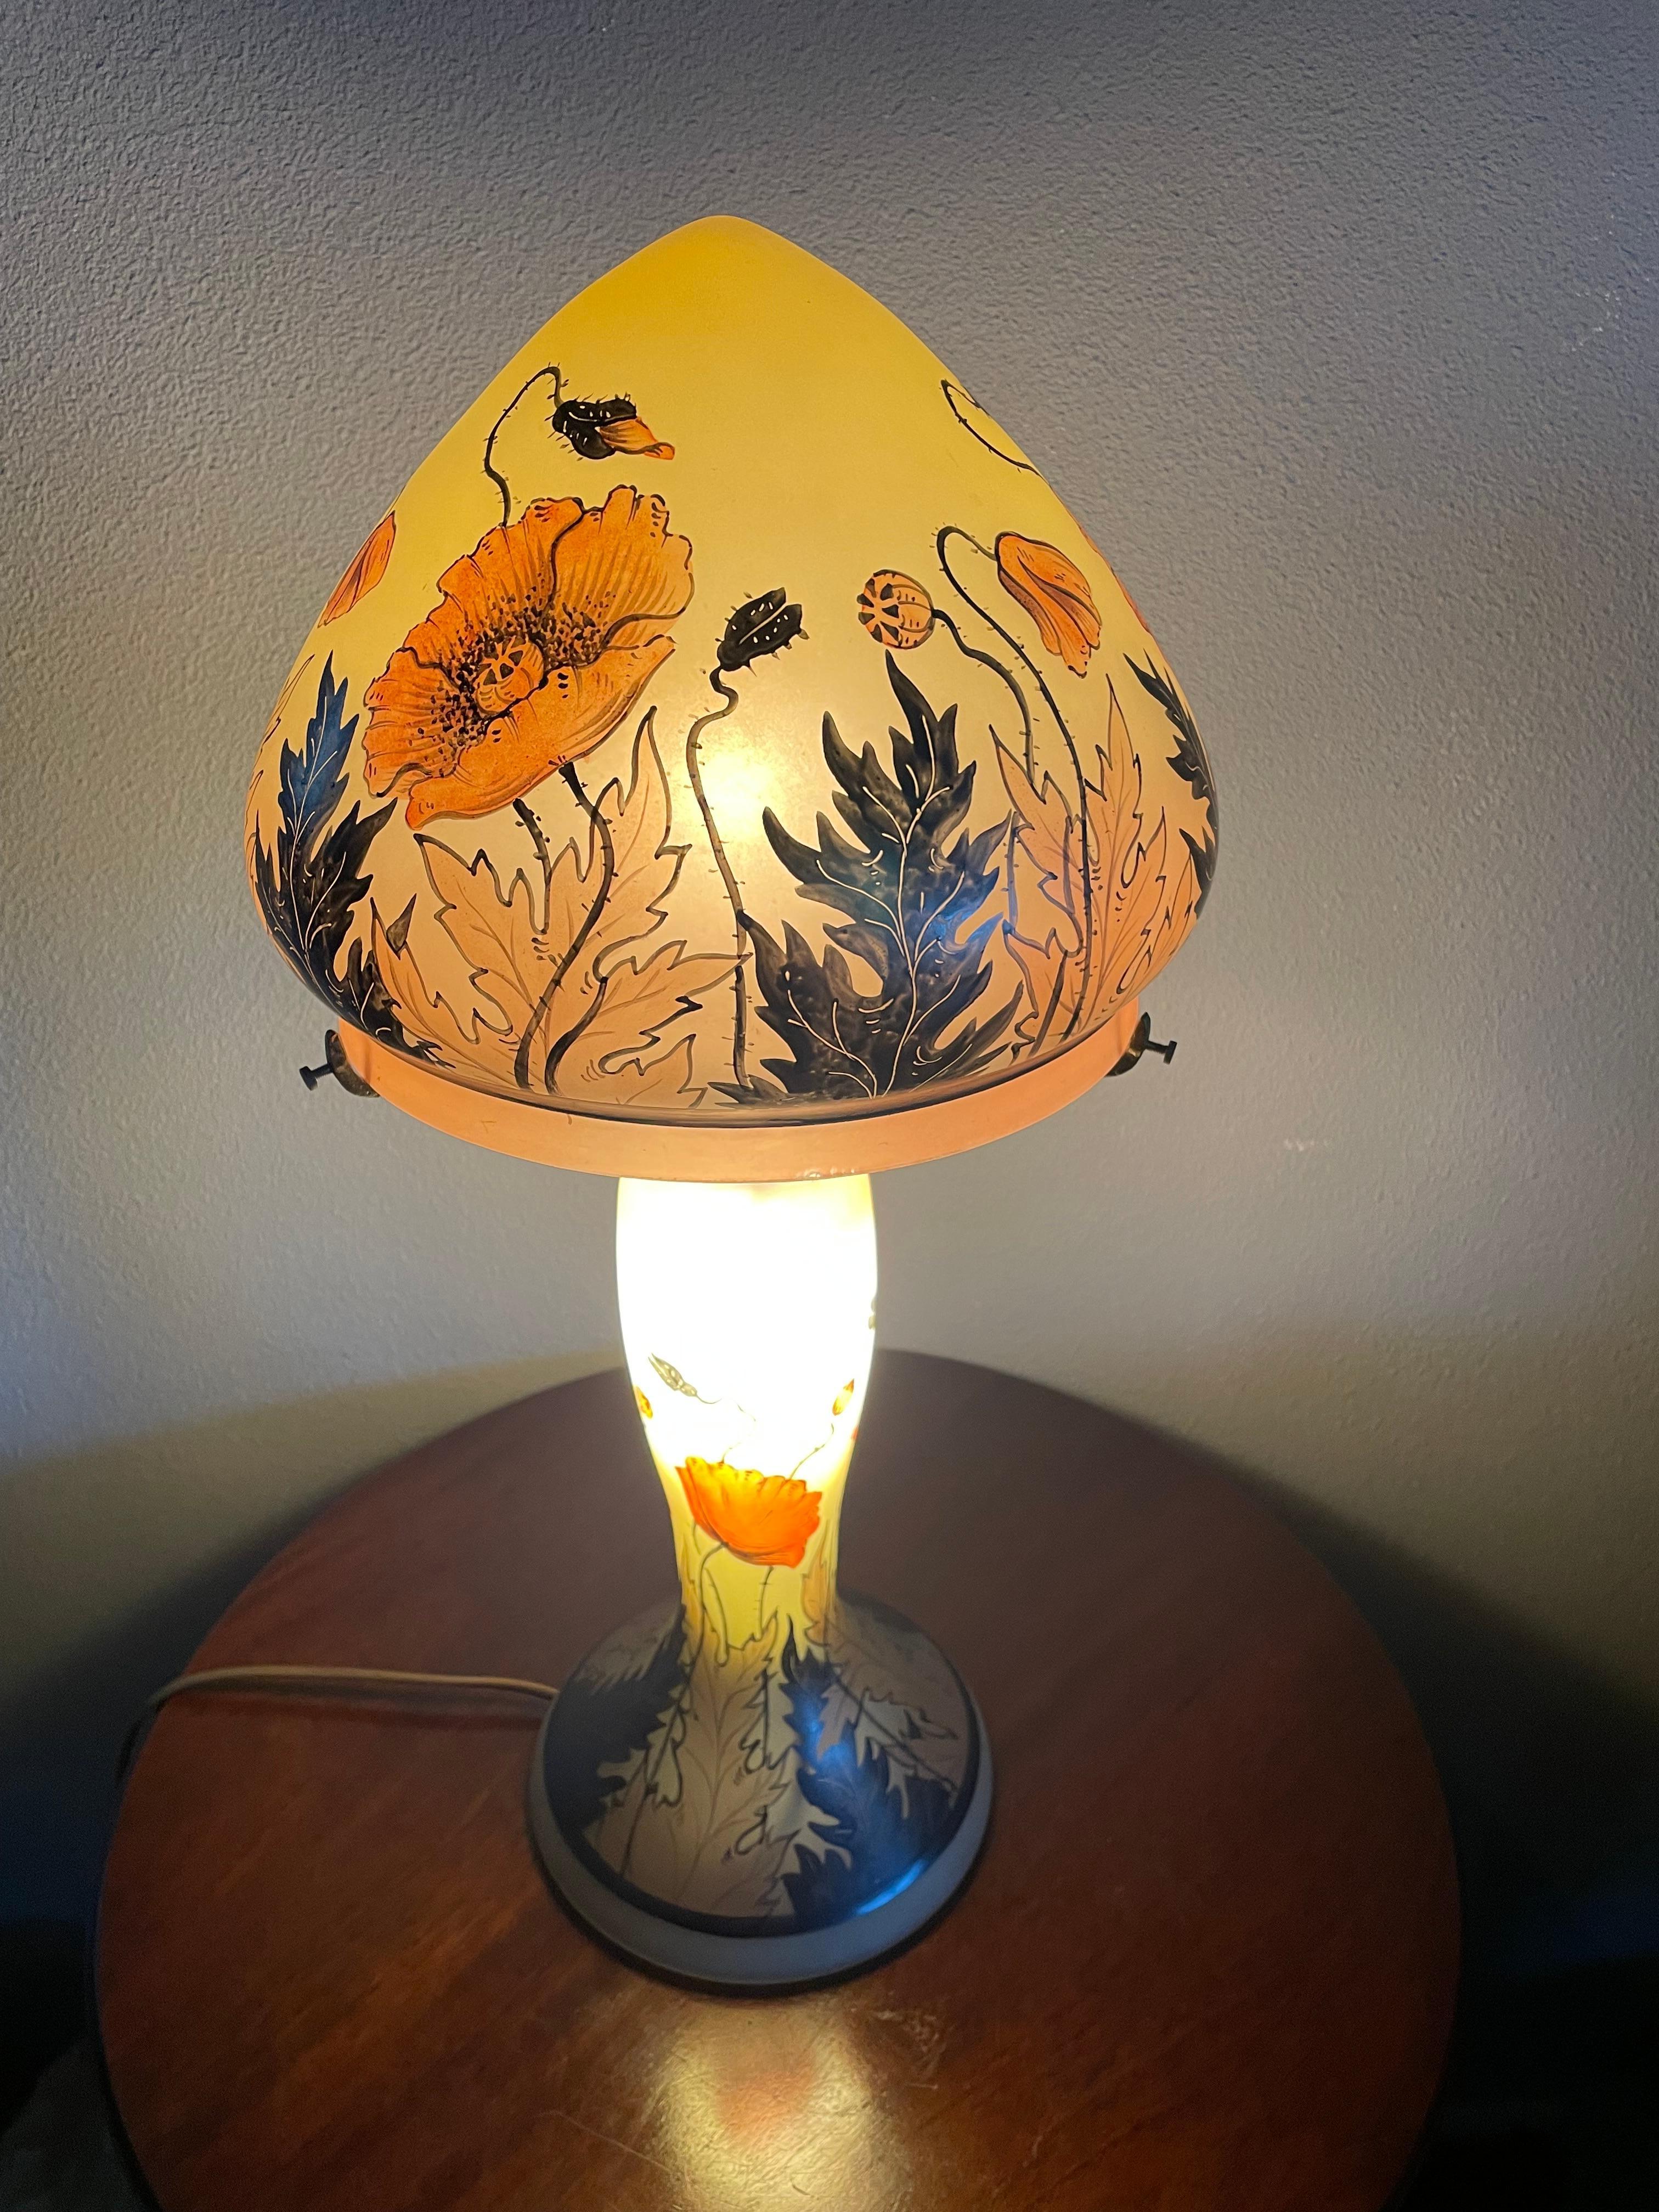 Very rare, large size, top quality made and great condition antique lamp.

This work-of-art-table-lamp from the earliest years of the 1900s is of museum quality and condition. Not only has it one of the most beautiful color combinations you ever